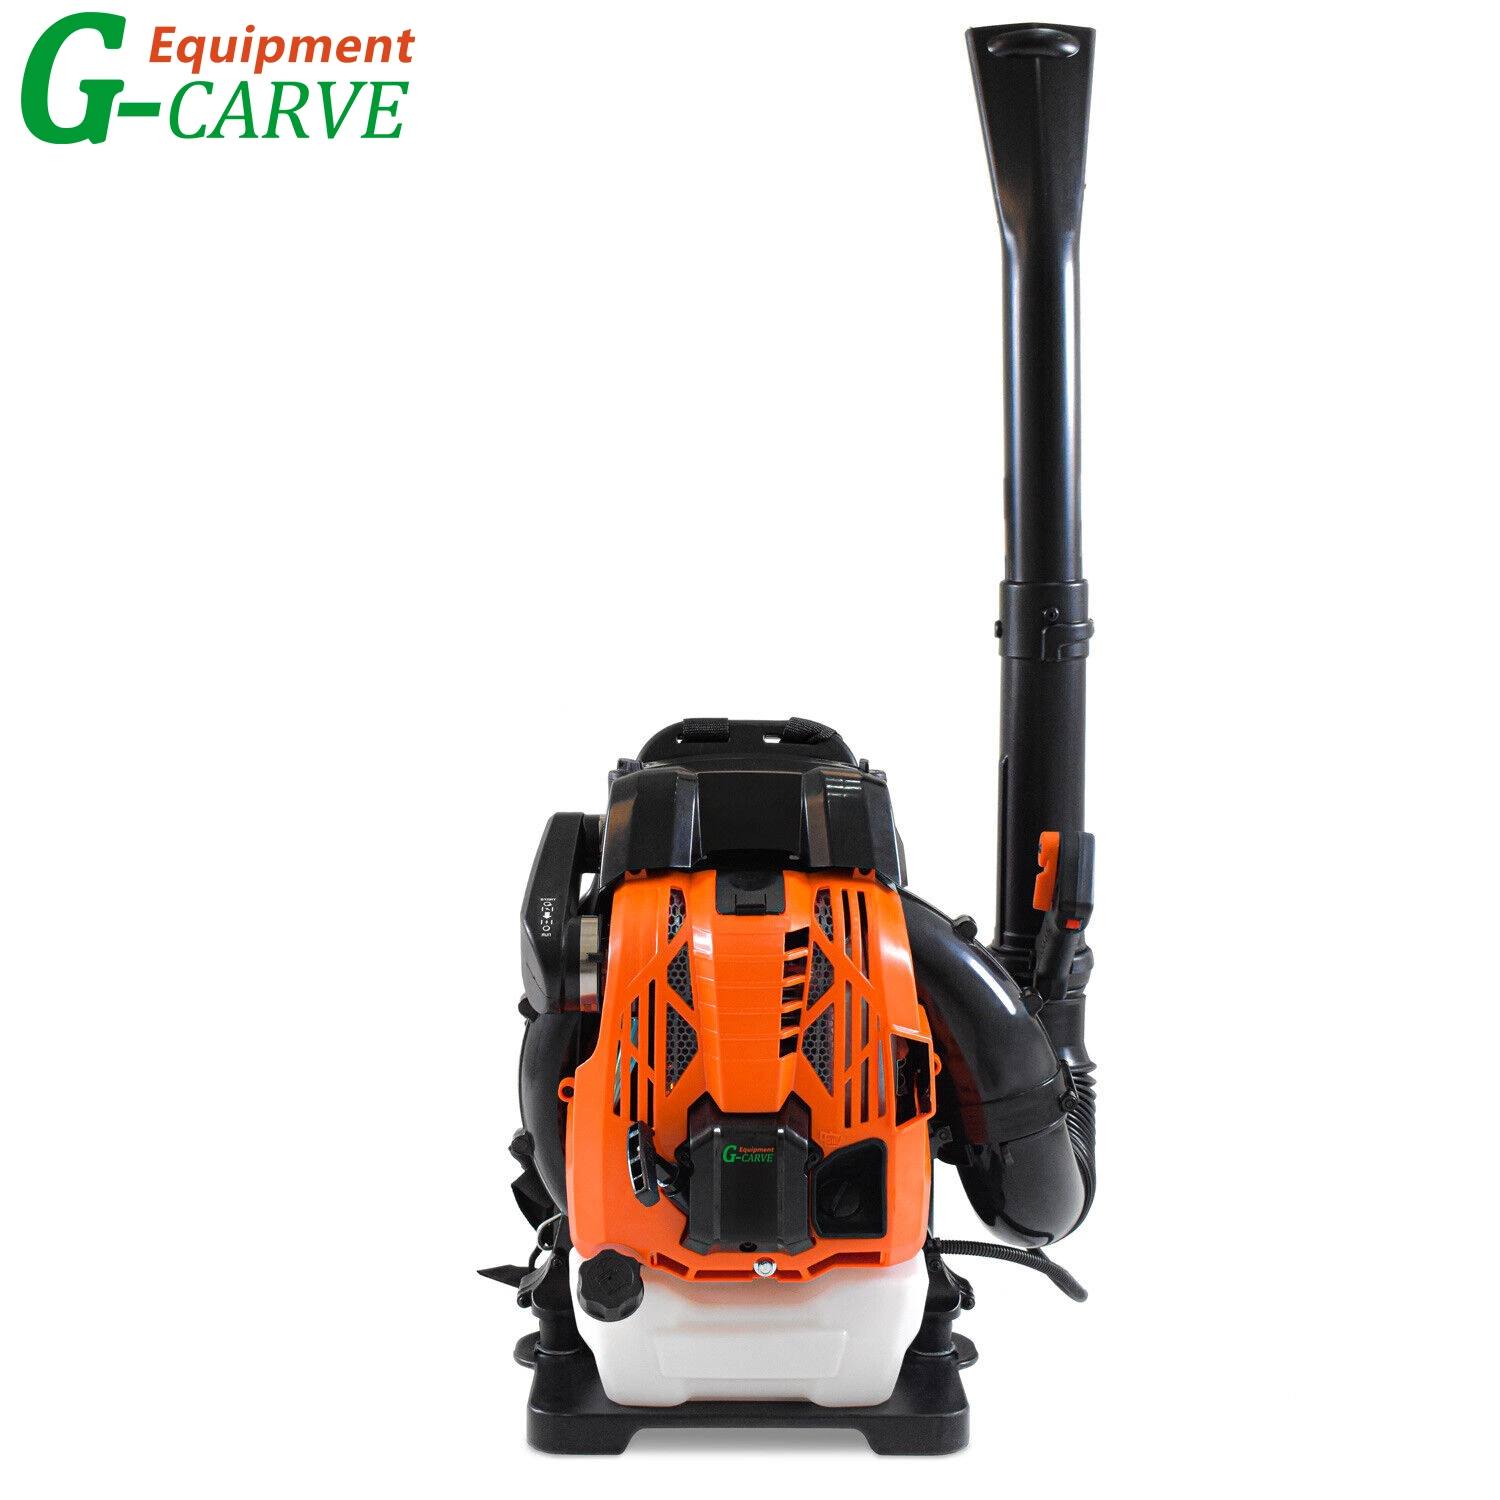 G-Carve Electric Air Blower Vacuum Cleaner Blowing Dust Collecting 2 in 1 Computer Dust Collector Cleaner